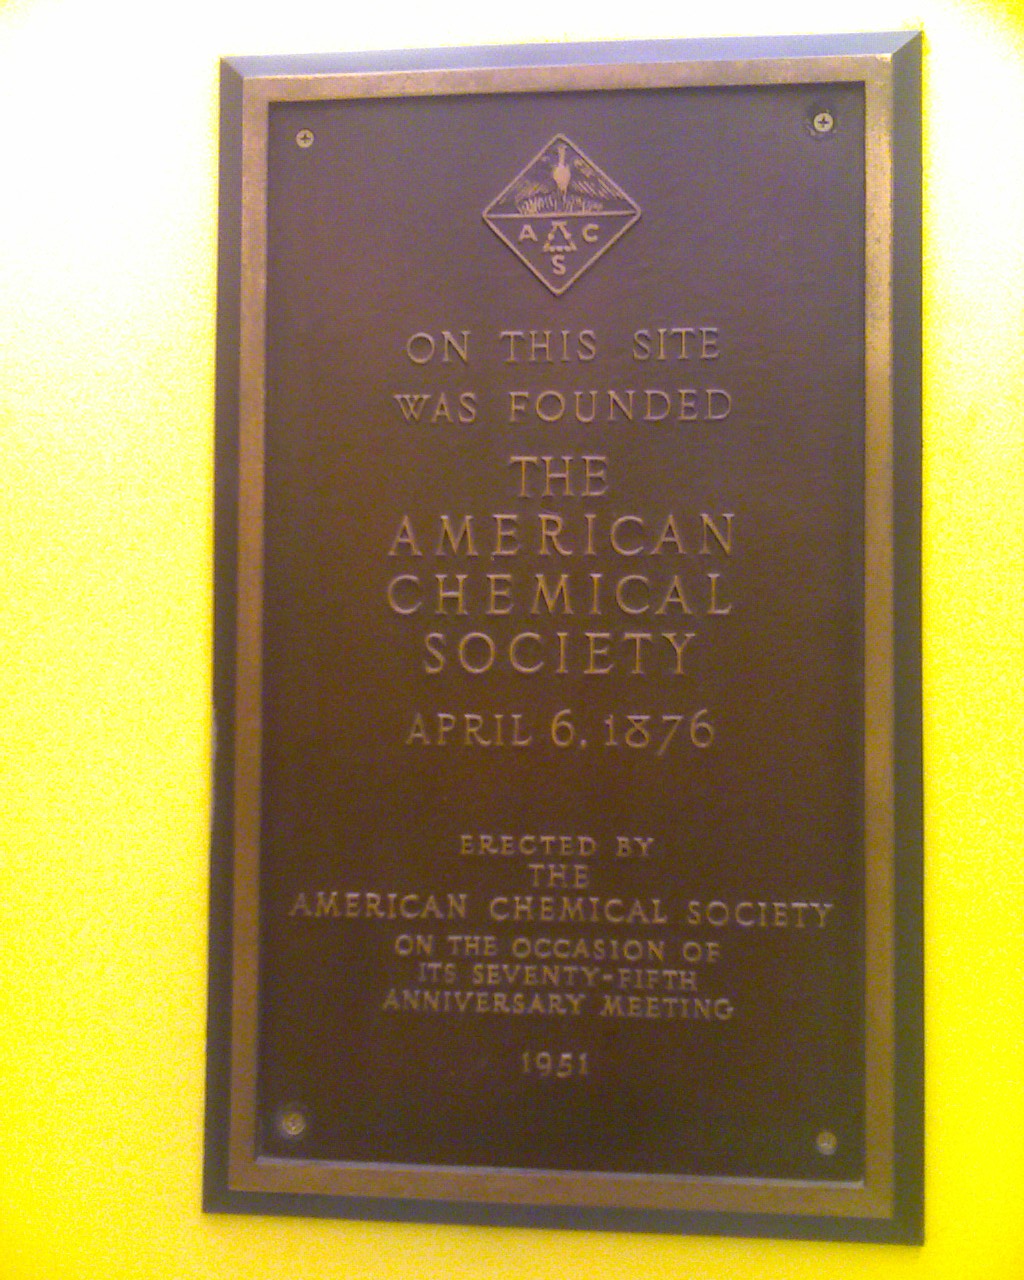 little did I know that the American Chemical Society was founded in NYC